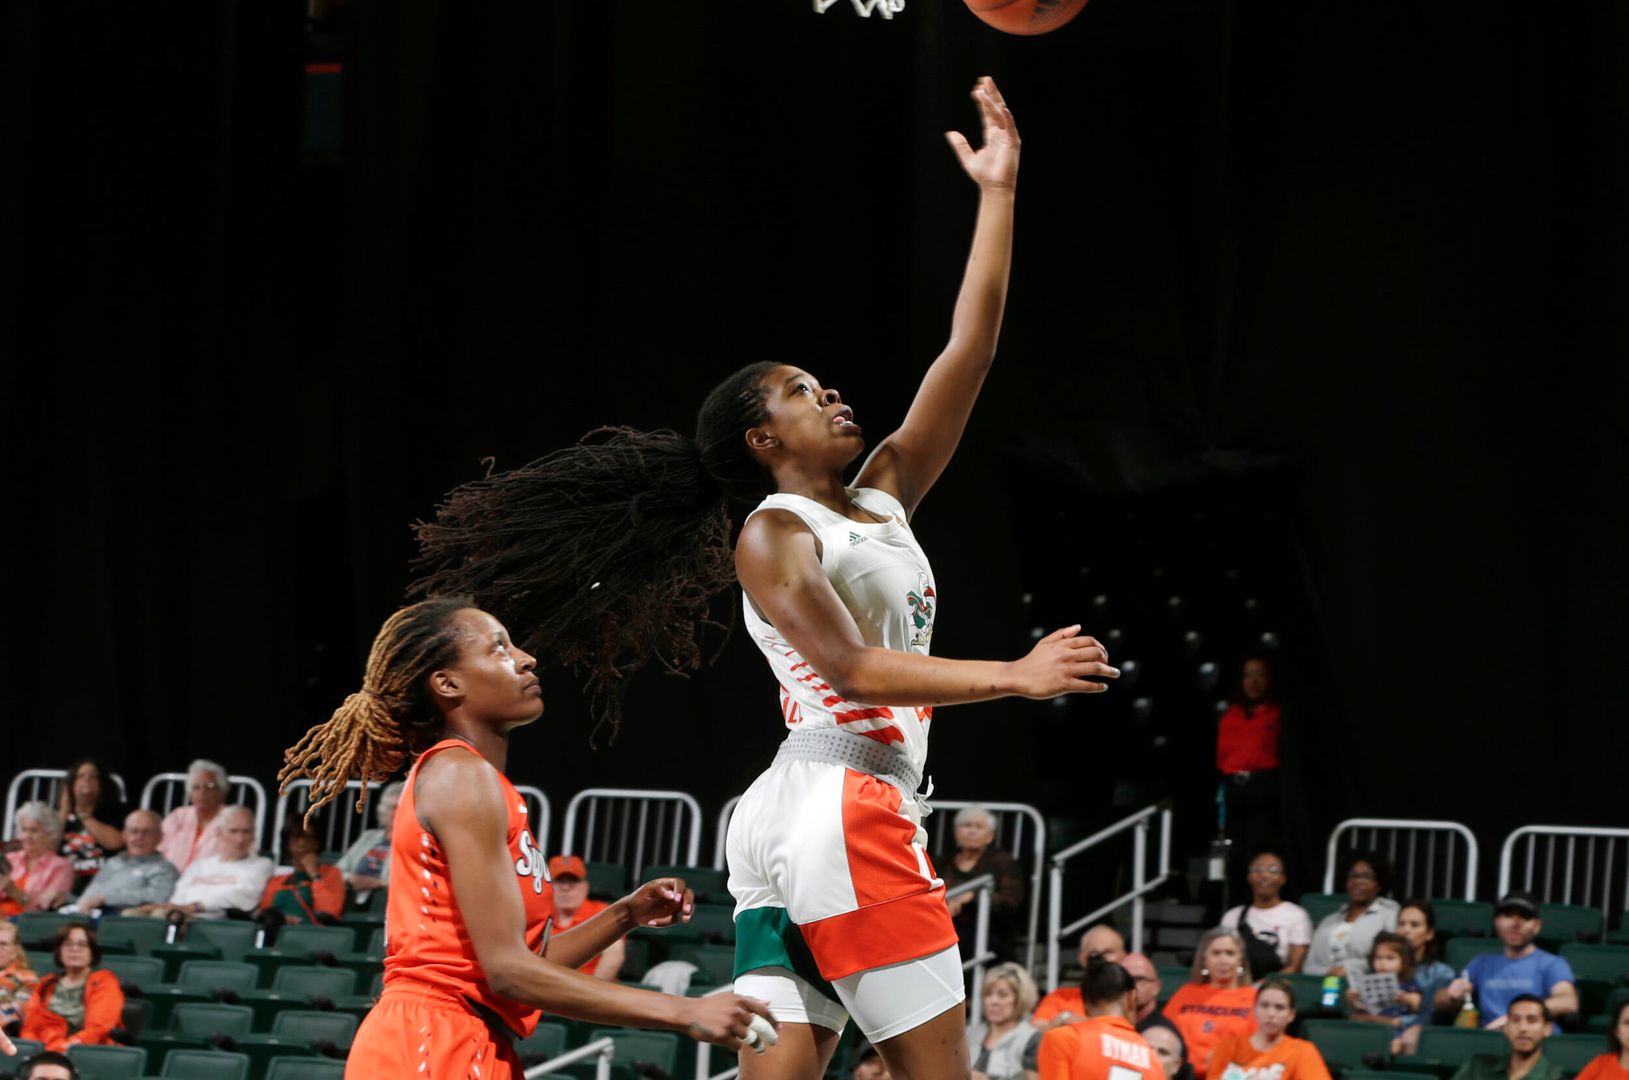 Canes WBB bests Syracuse